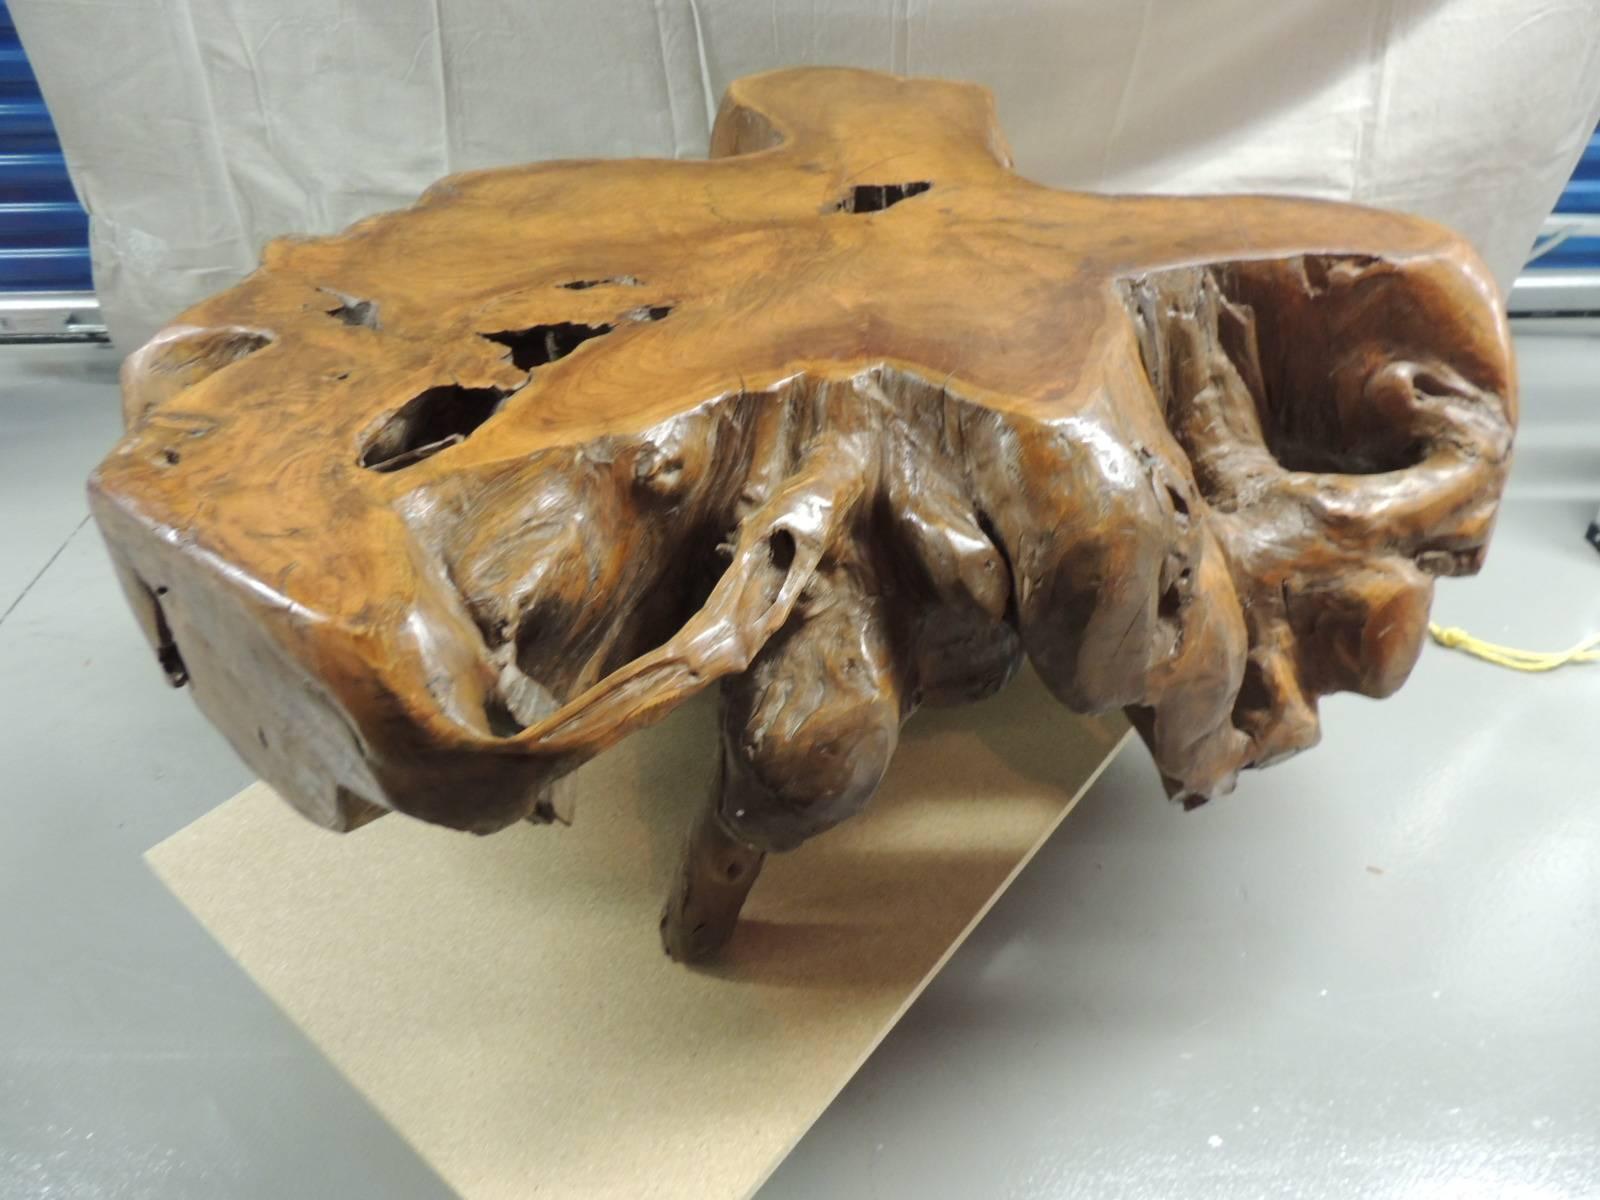 Monumental teak root coffee table with an organic free-form top, harvest from sustainable teak wood harvesting in Indonesia. The teak root is carefully unearthed, instead of being left to rot underground to create this unique one-of-the-kind coffee